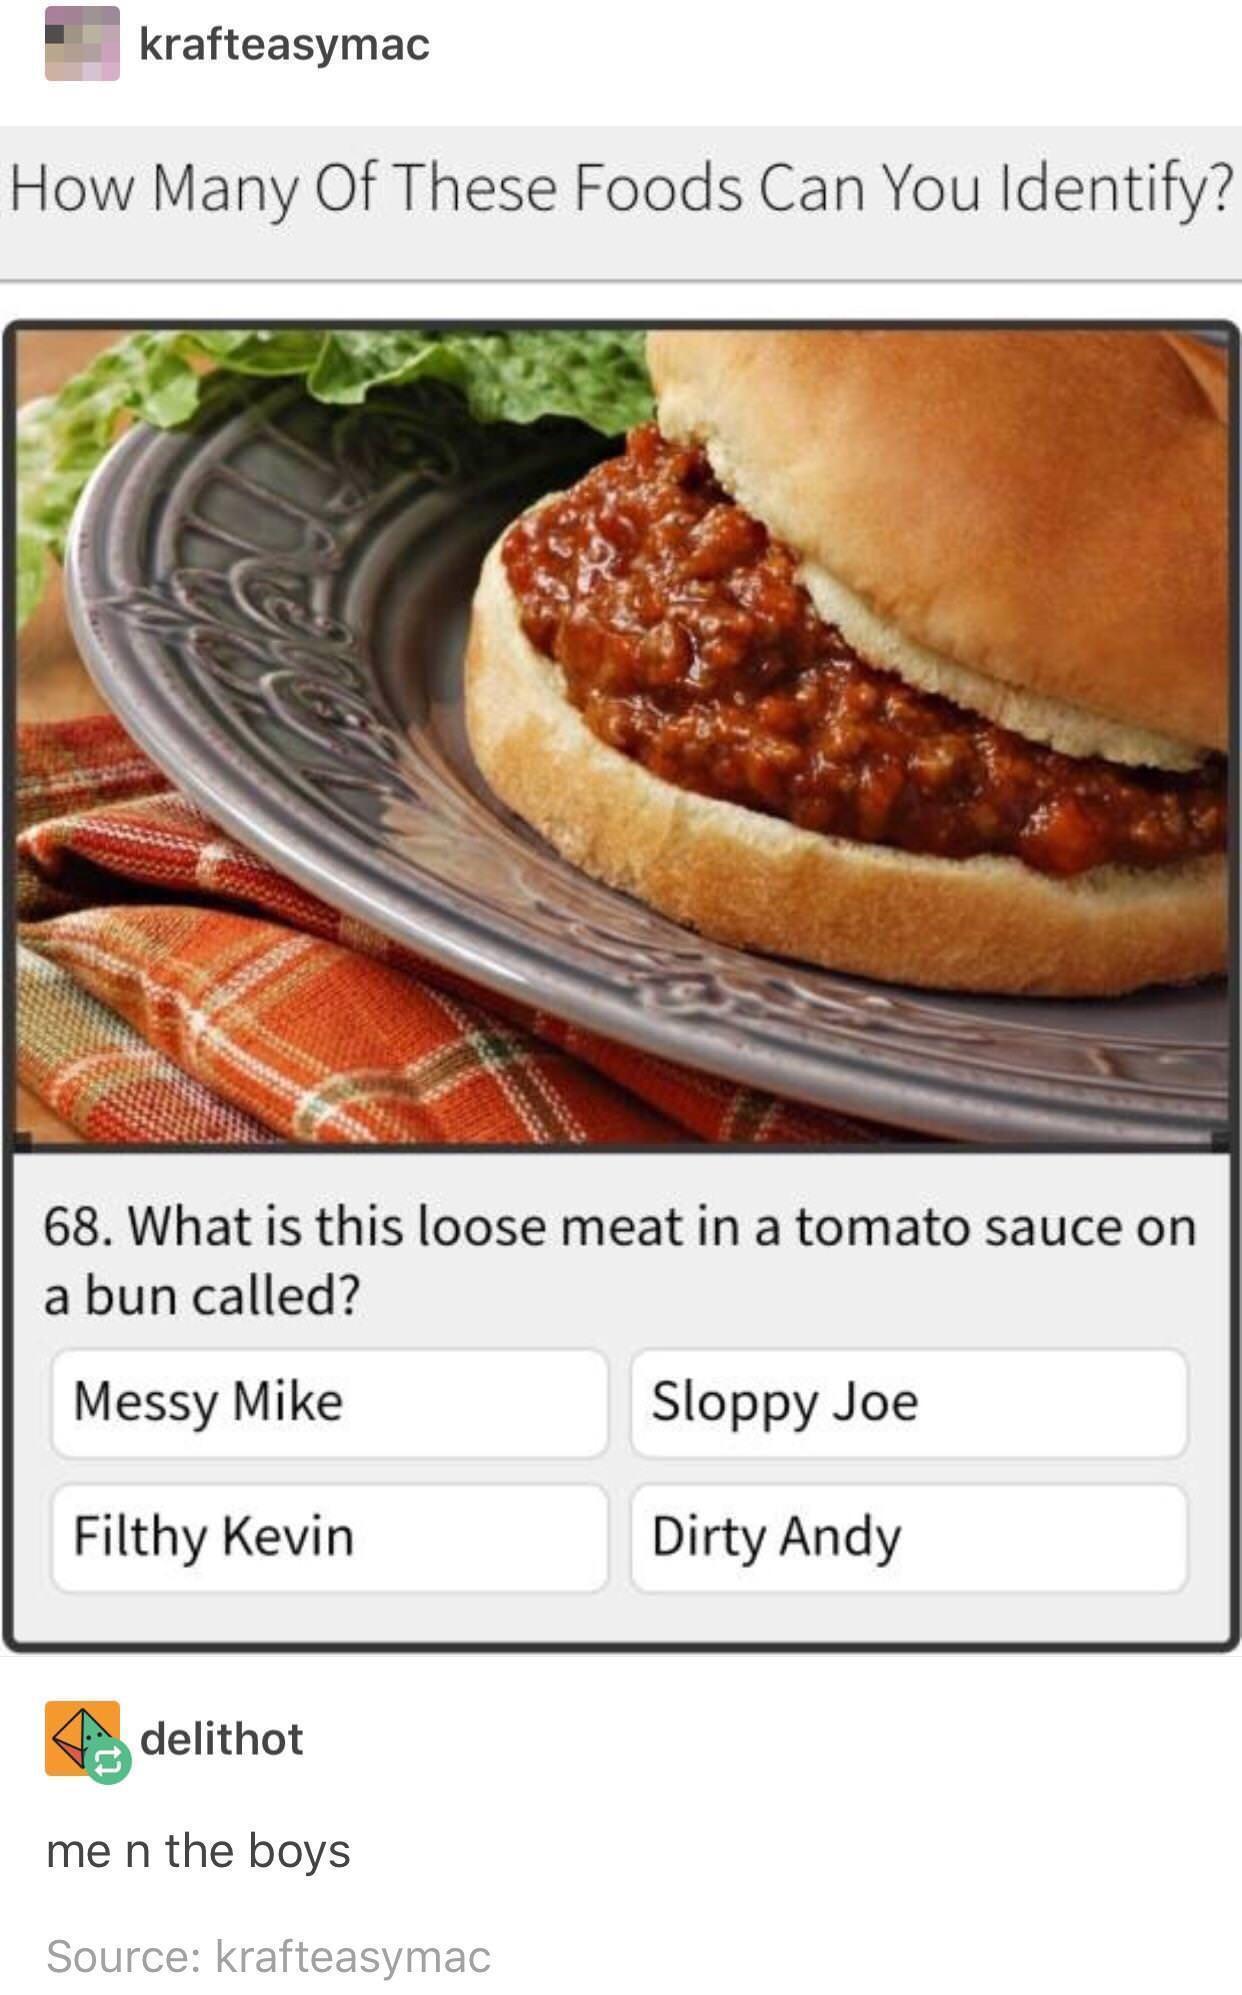 fresh memes - sloppy joe meme - krafteasymac How Many Of These Foods Can You Identify? 68. What is this loose meat in a tomato sauce on a bun called? Messy Mike Filthy Kevin delithot me n the boys Source krafteasymac Sloppy Joe Dirty Andy